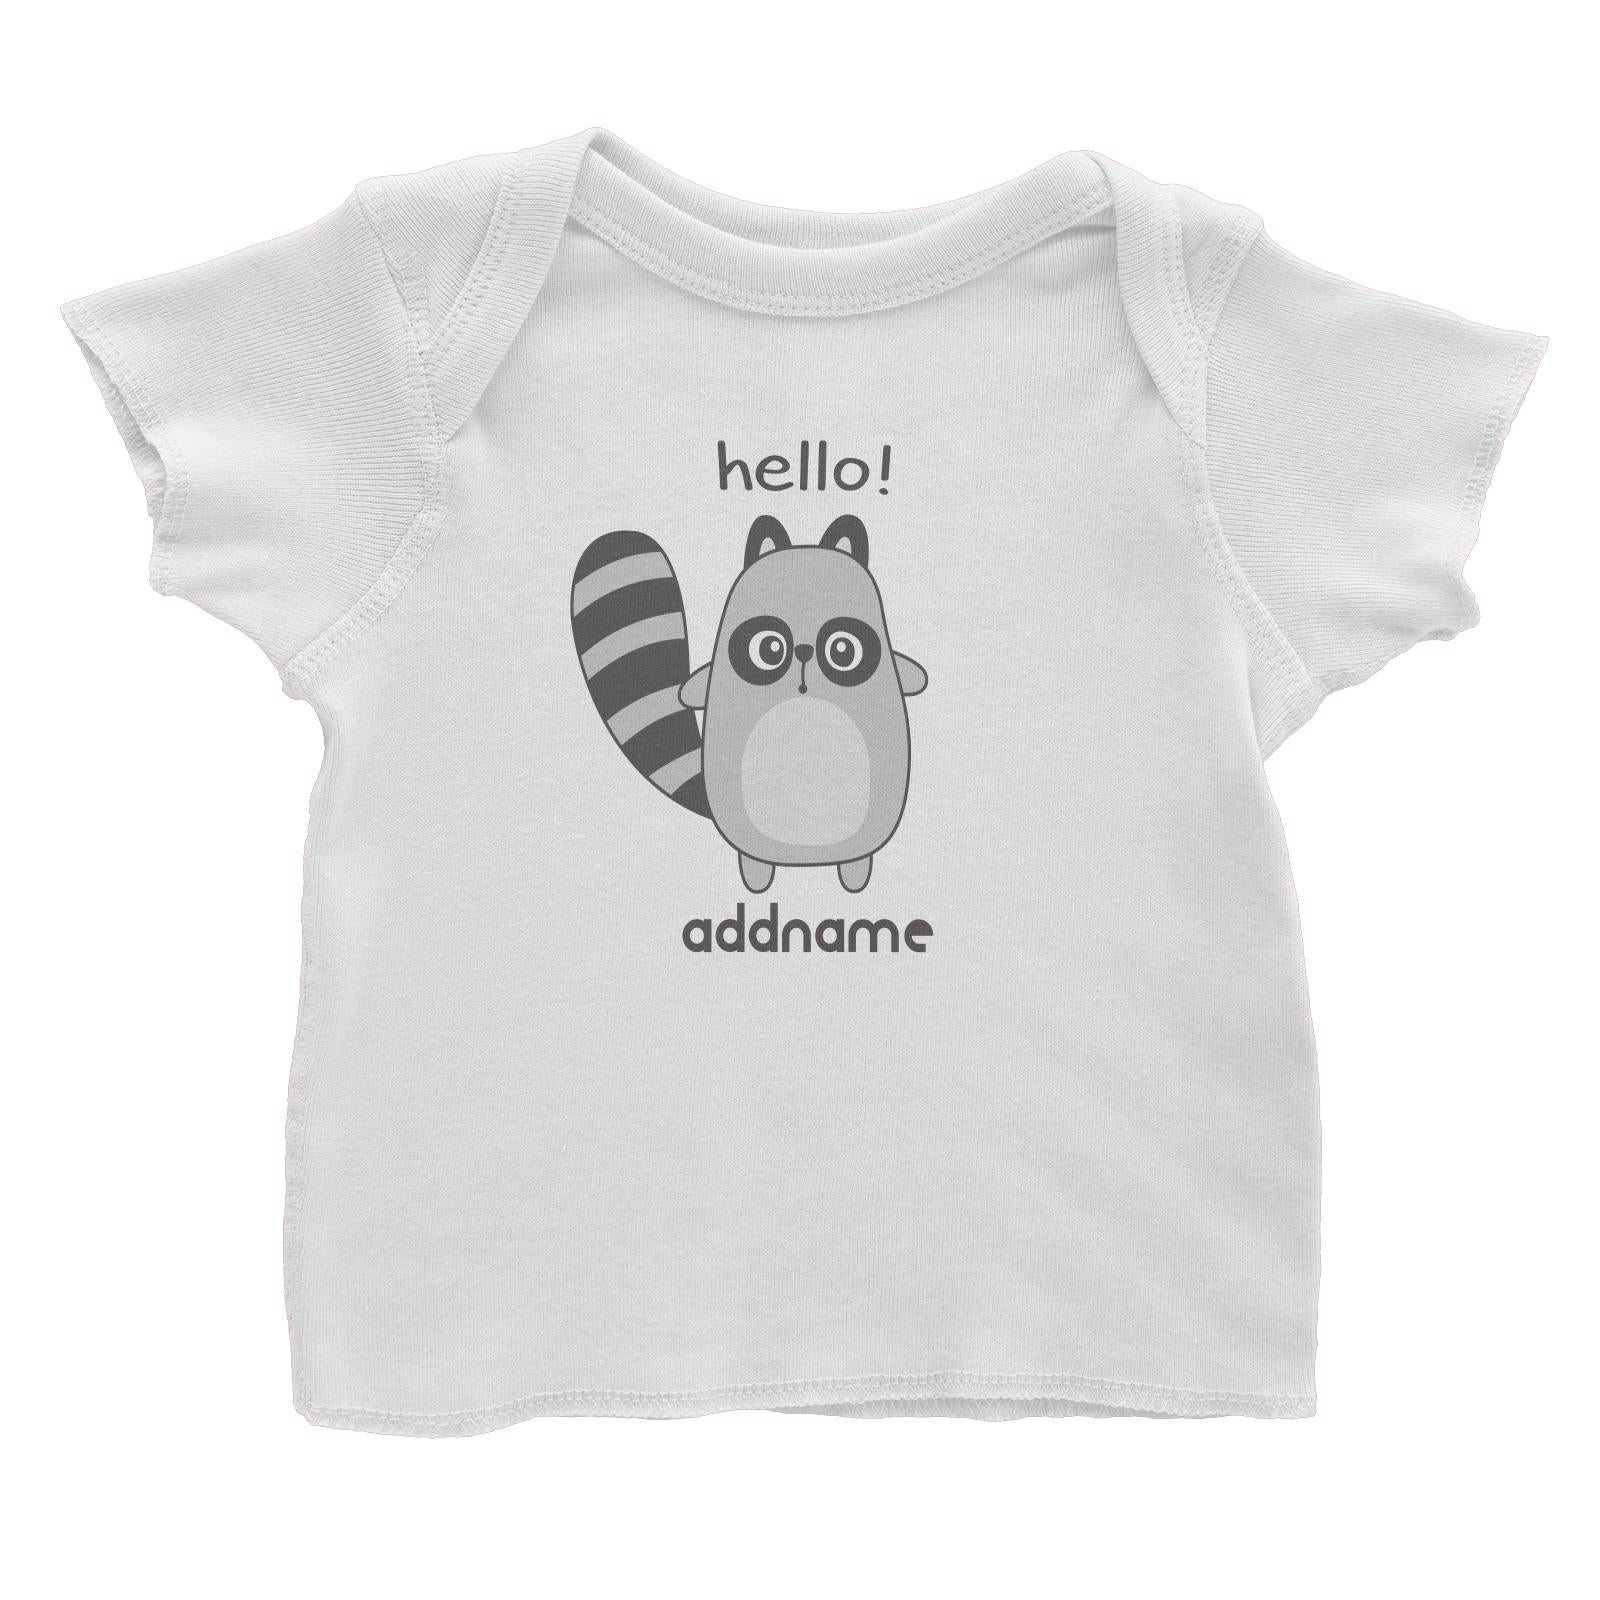 Cool Cute Animals Racoon Hello Addname Baby T-Shirt